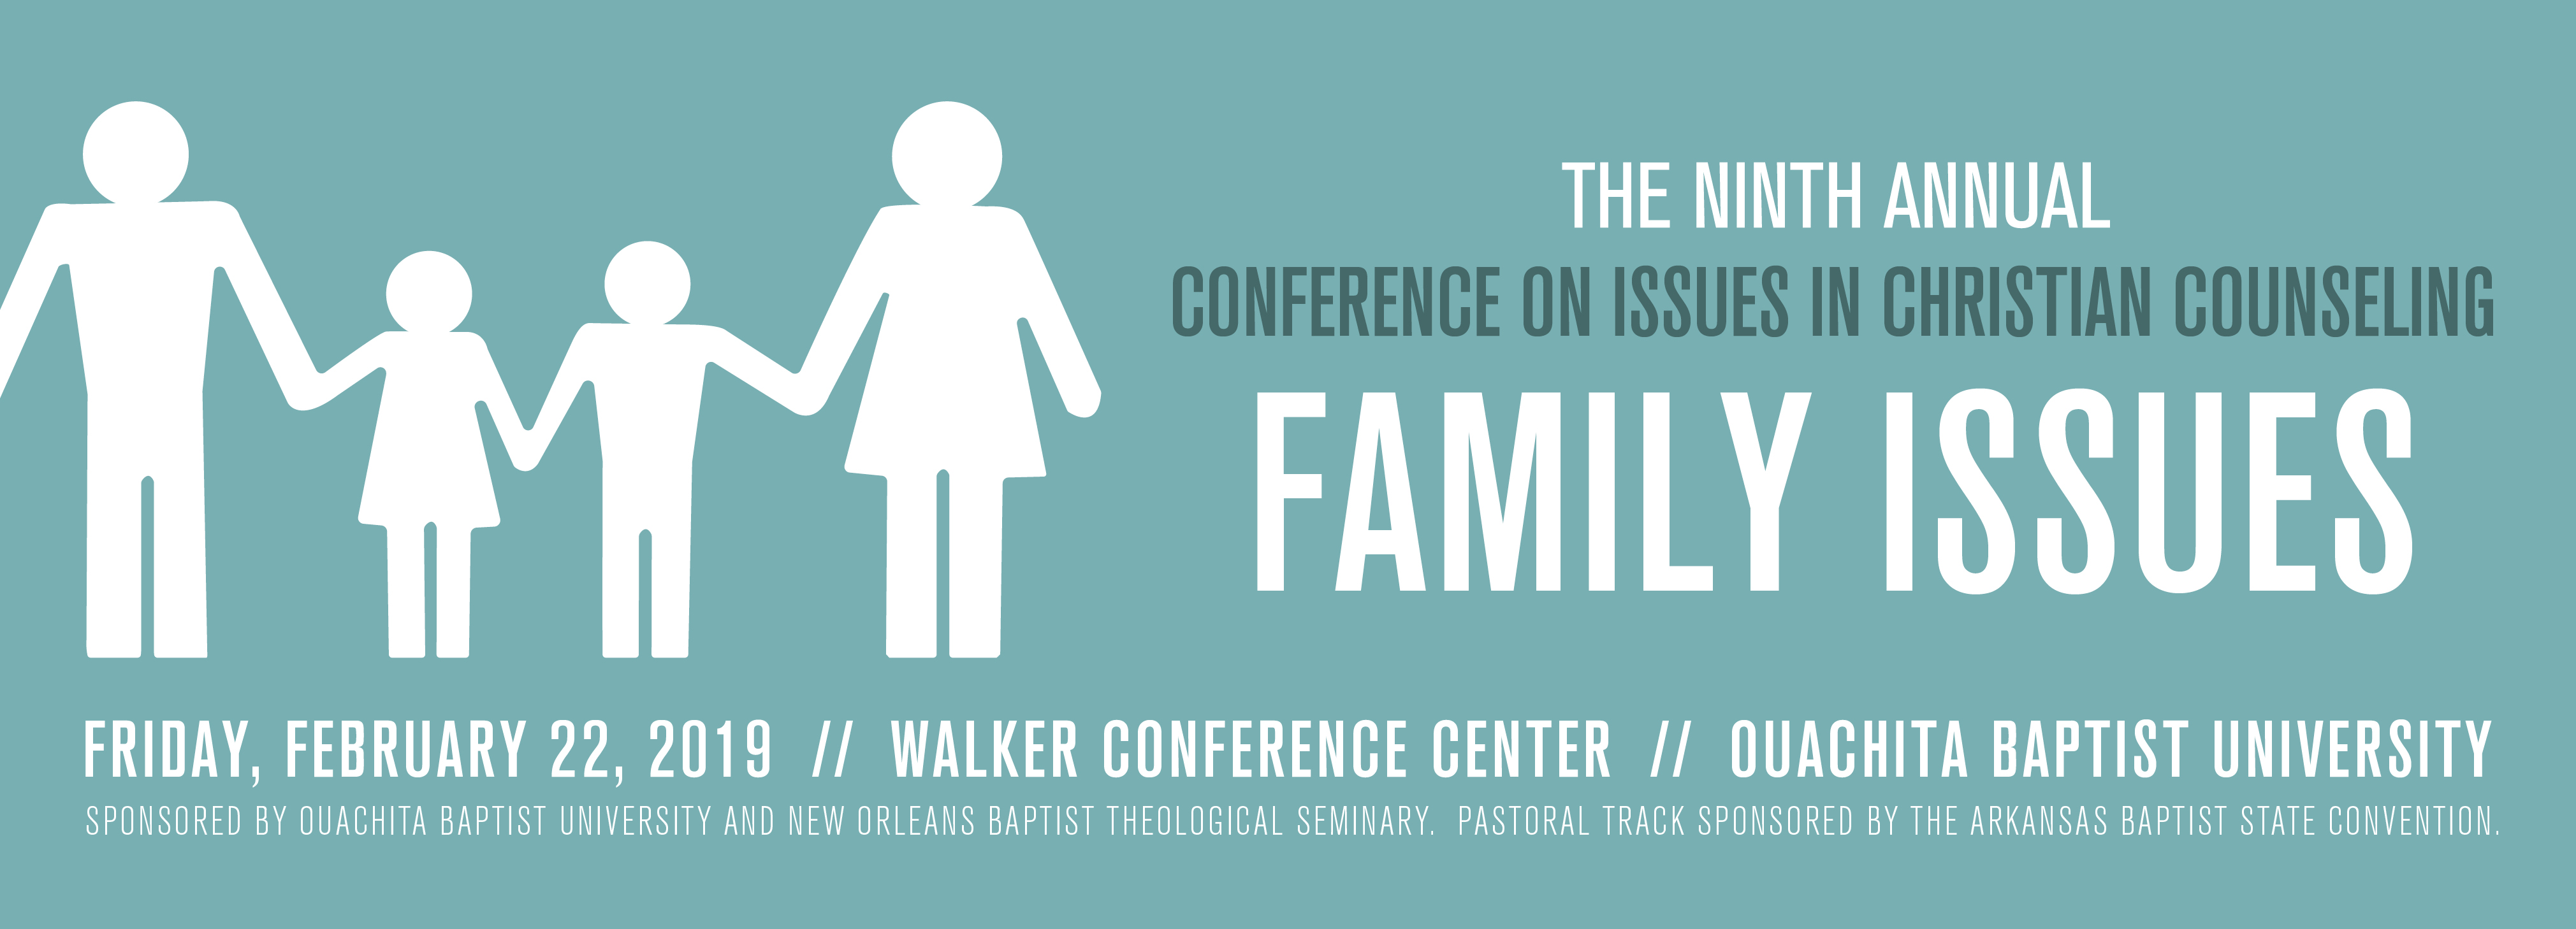 Ouachita to host ninth annual Conference on Issues in Christian Counseling.